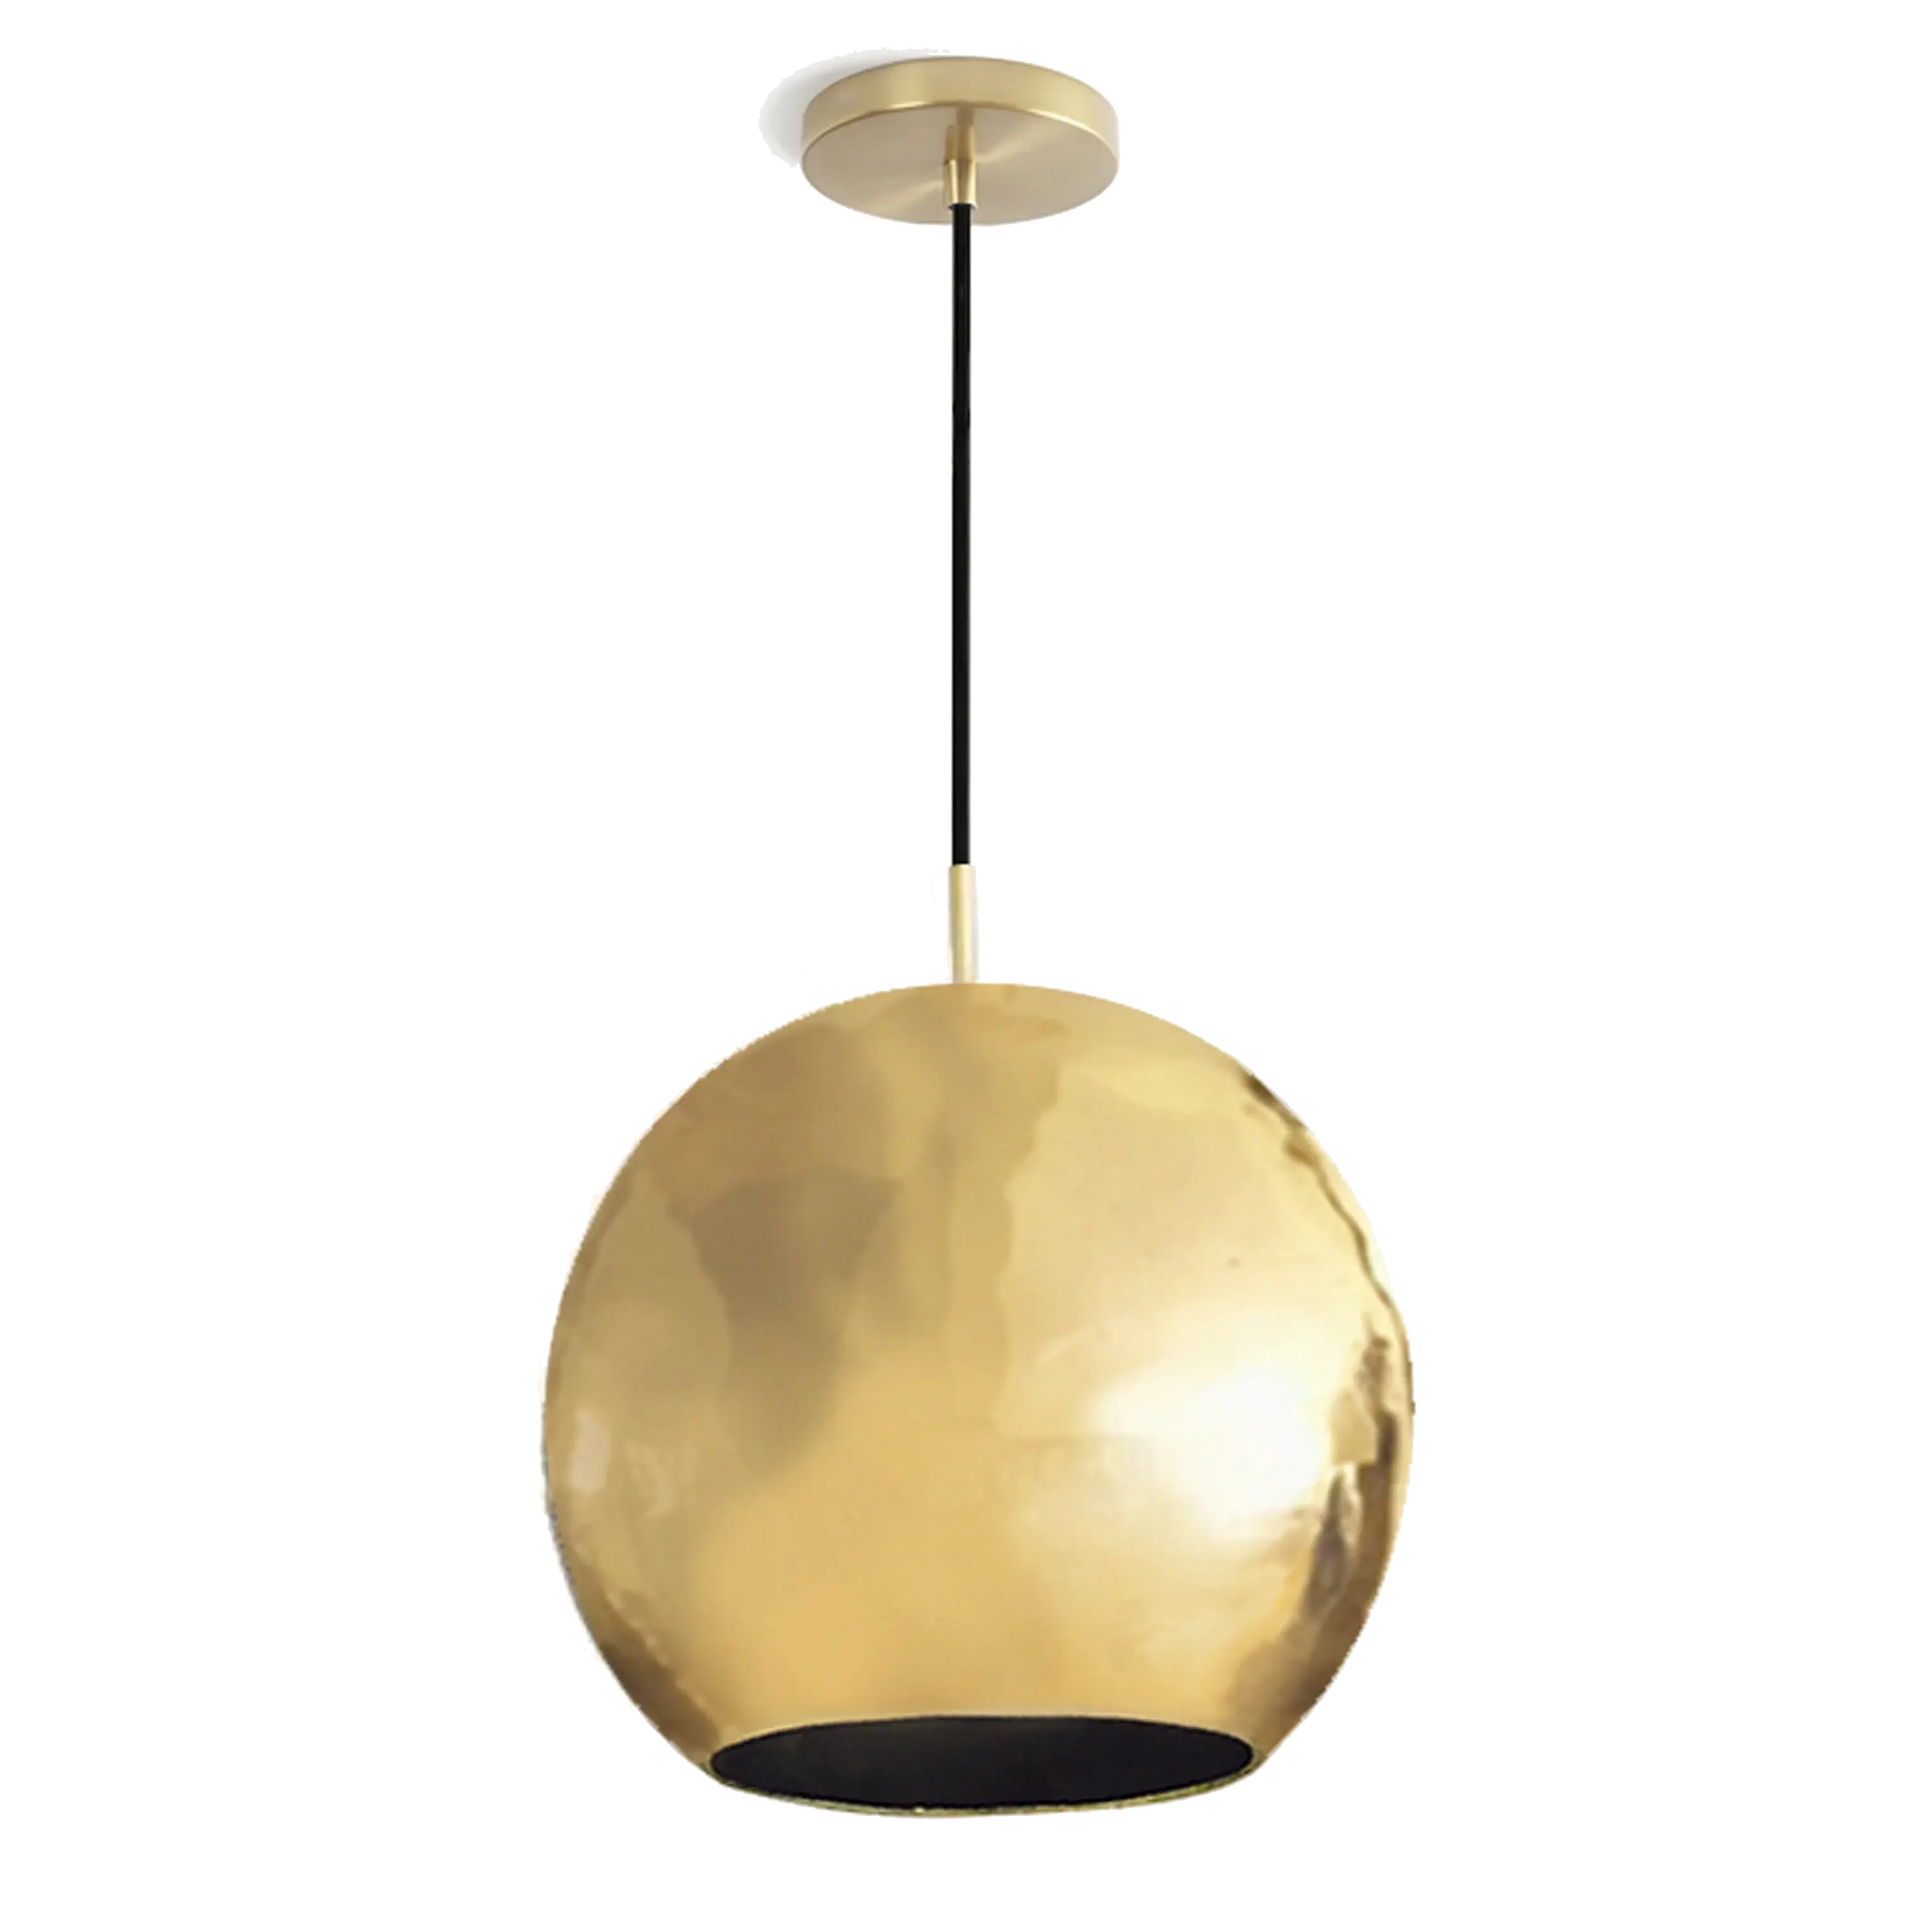 Dounia home Pendant light in antique brass  made of Metal, Model: Mishal